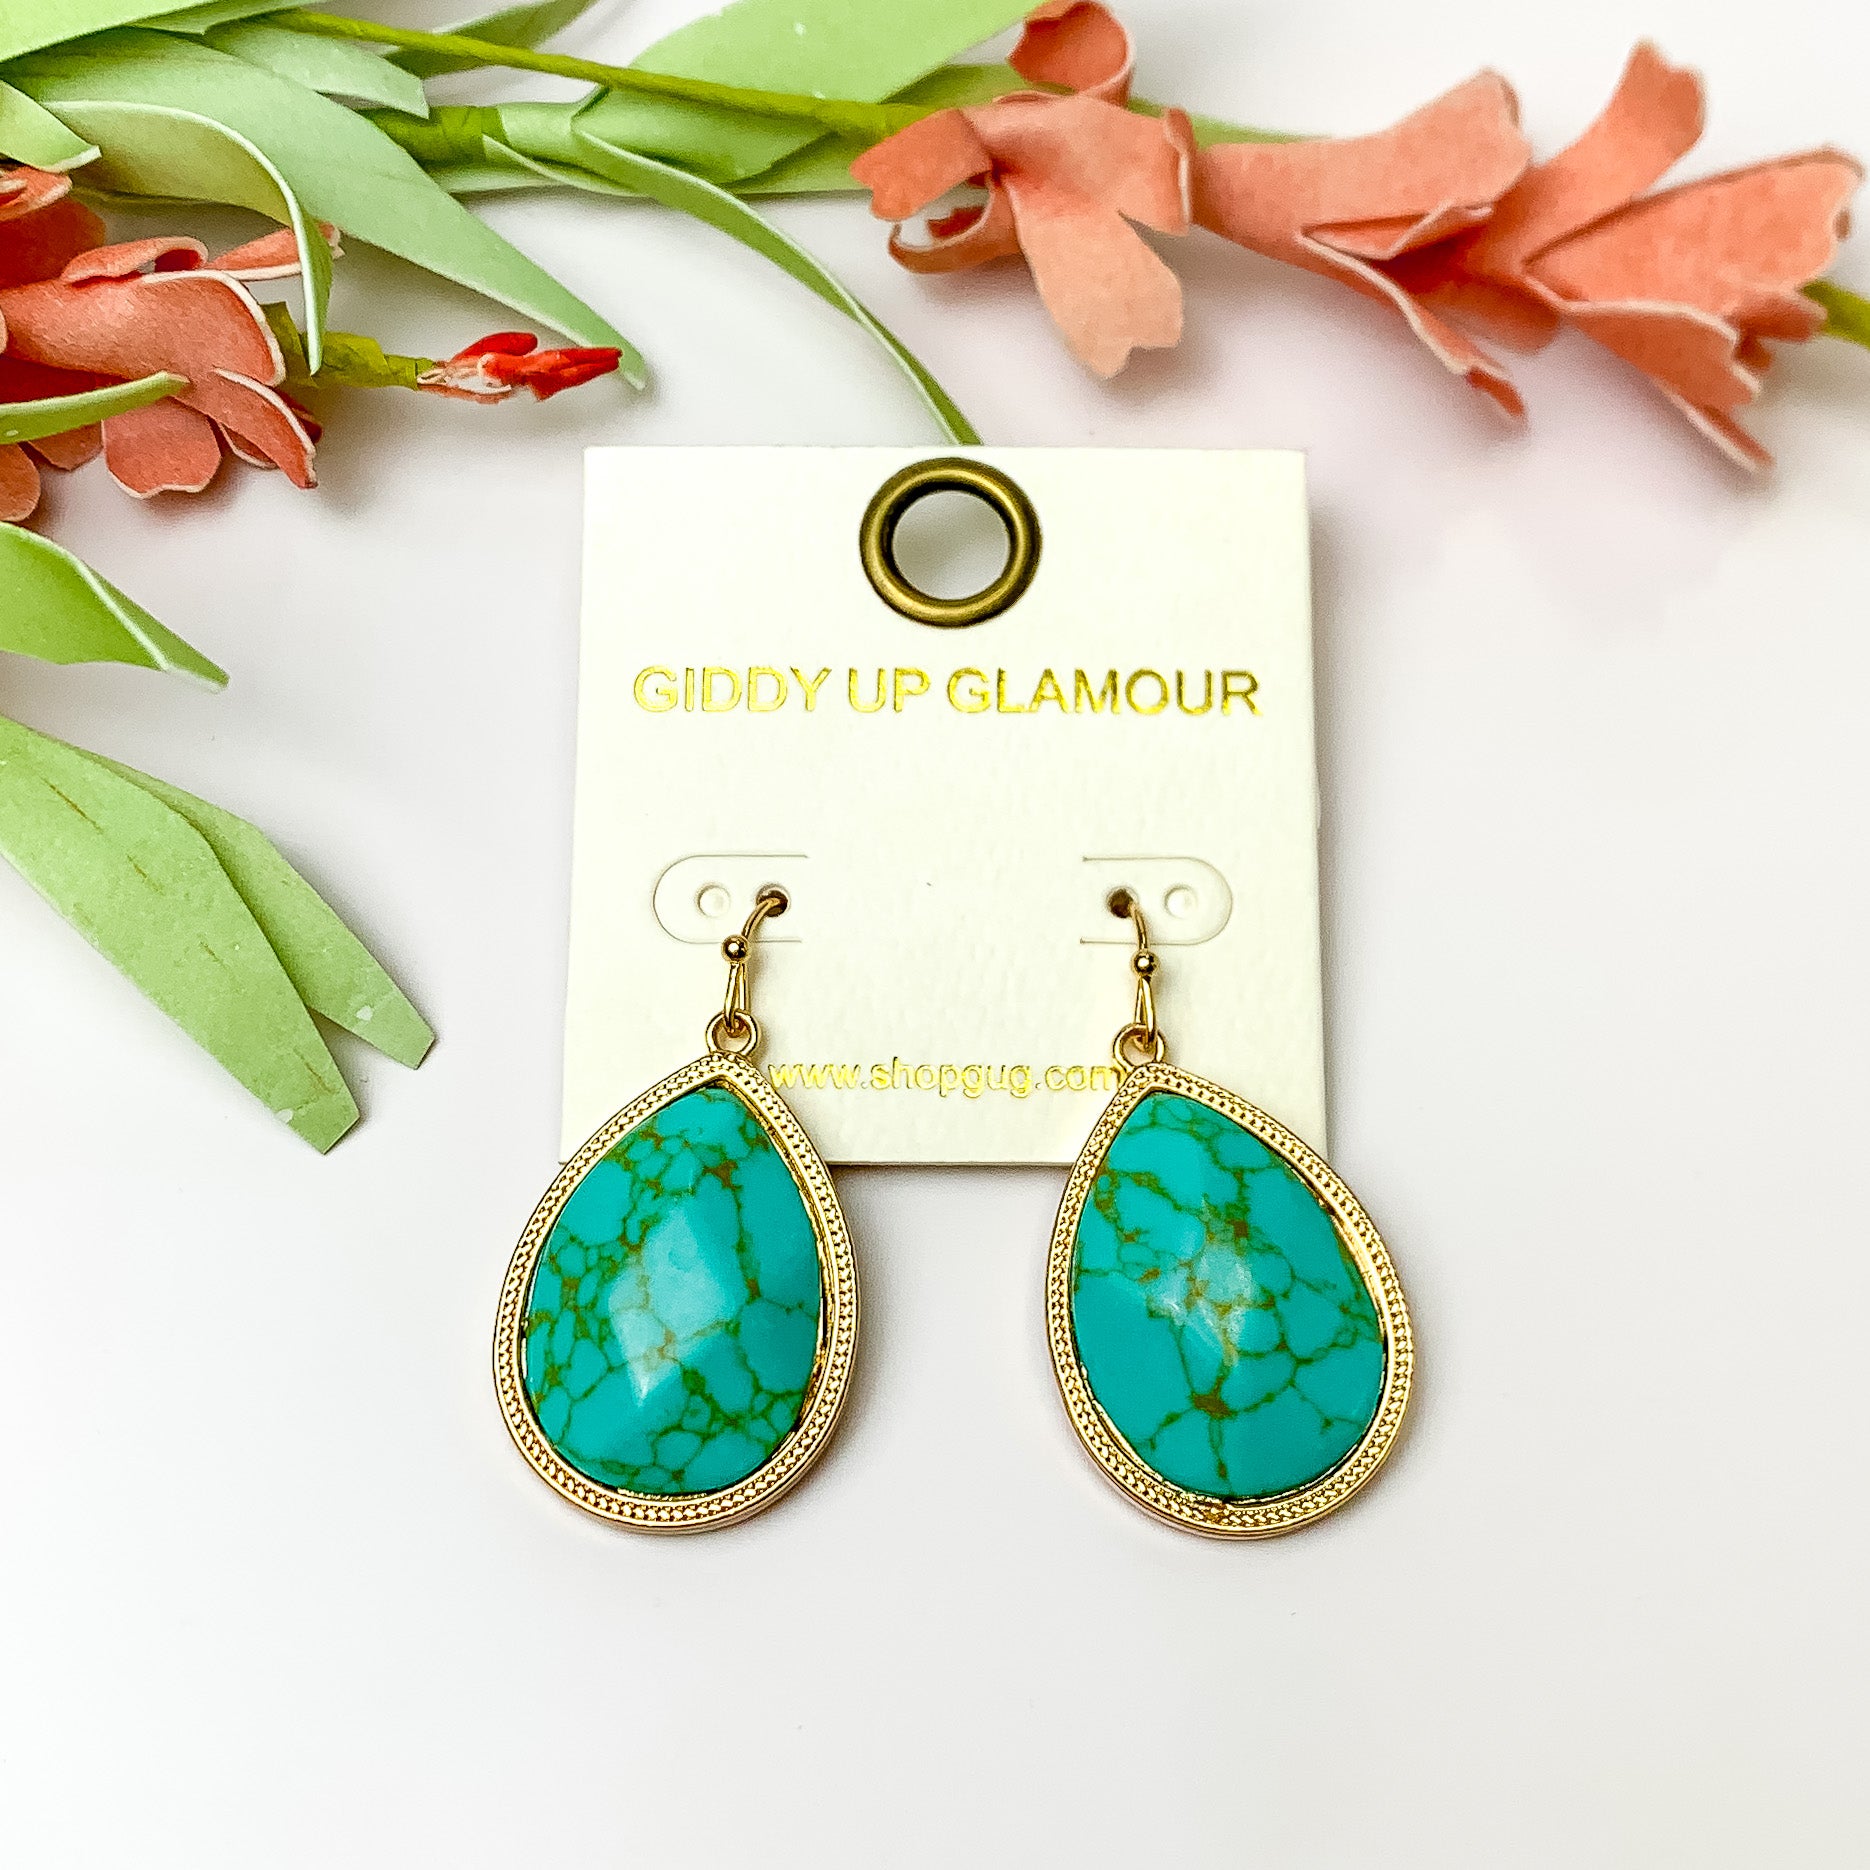 Turquoise Drop Earrings with Gold tone outline. Pictured on a white background with flowers at the top.